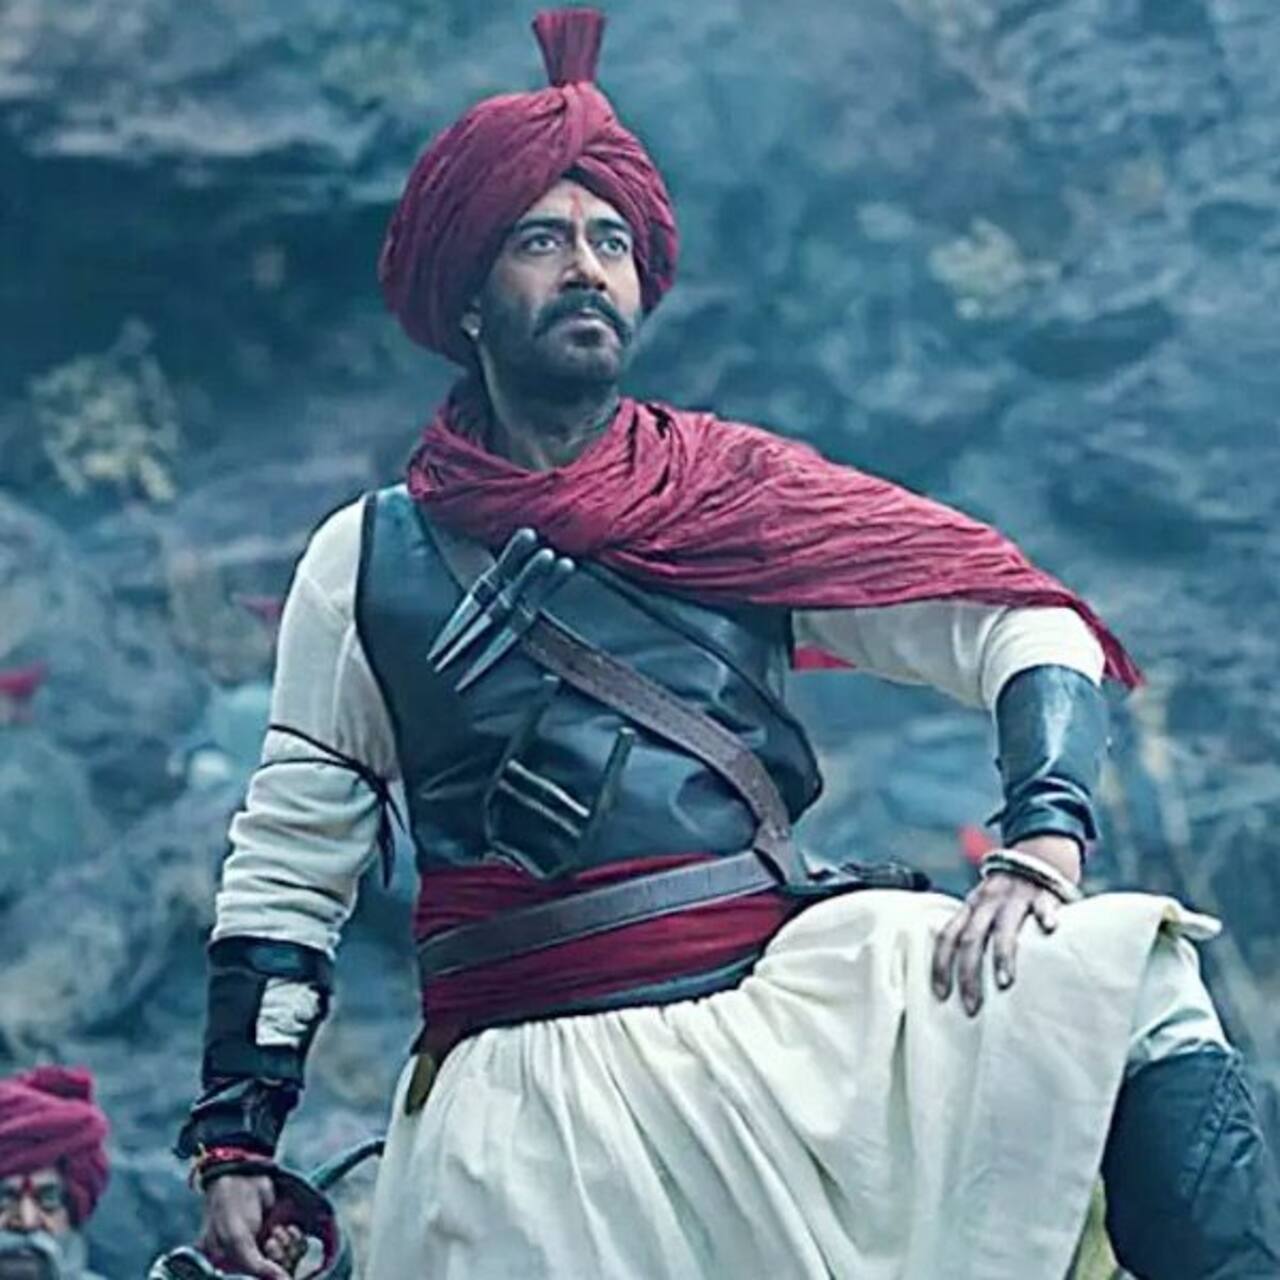 Best Bollywood historical movies: Tanhaji the Unsung Warrior starring Ajay Devgn